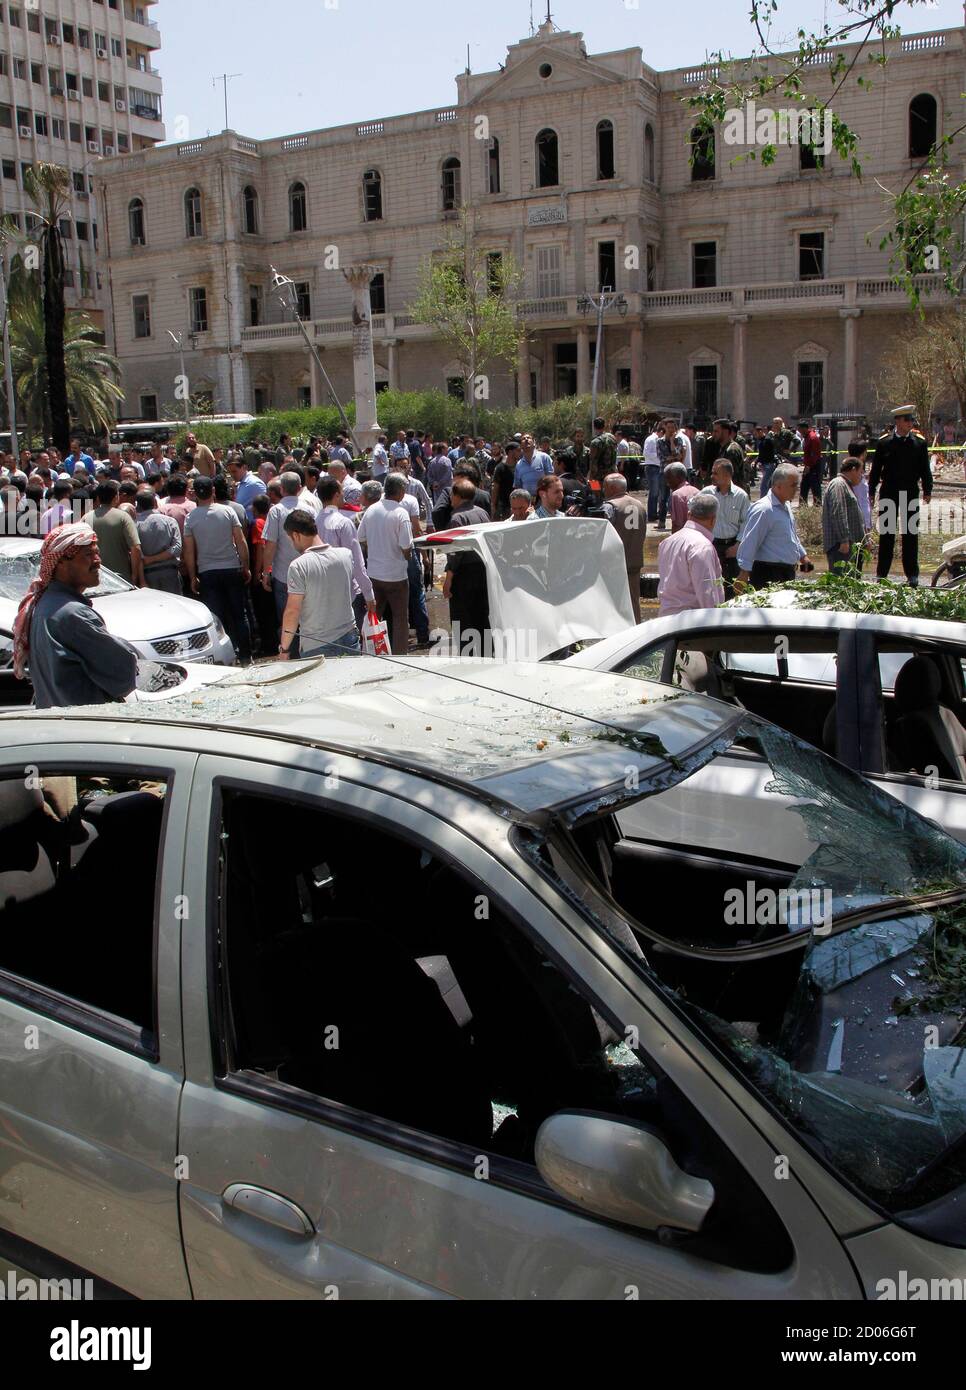 People walk on a street near the former Interior Ministry building and destroyed cars after a blast at Marjeh Square in Damascus April 30, 2013. The bomb in central Damascus killed 13 people on Tuesday, state television said, a day after Prime Minister Wael al-Halki survived an attack on his convoy in the heart of the Syrian capital. State television said 70 people were wounded, several critically. The British-based Syrian Observatory reported 9 dead civilians and 3 security men and said the death toll was likely to rise. REUTERS/Khaled al-Hariri (SYRIA - Tags: POLITICS CONFLICT) Stock Photo